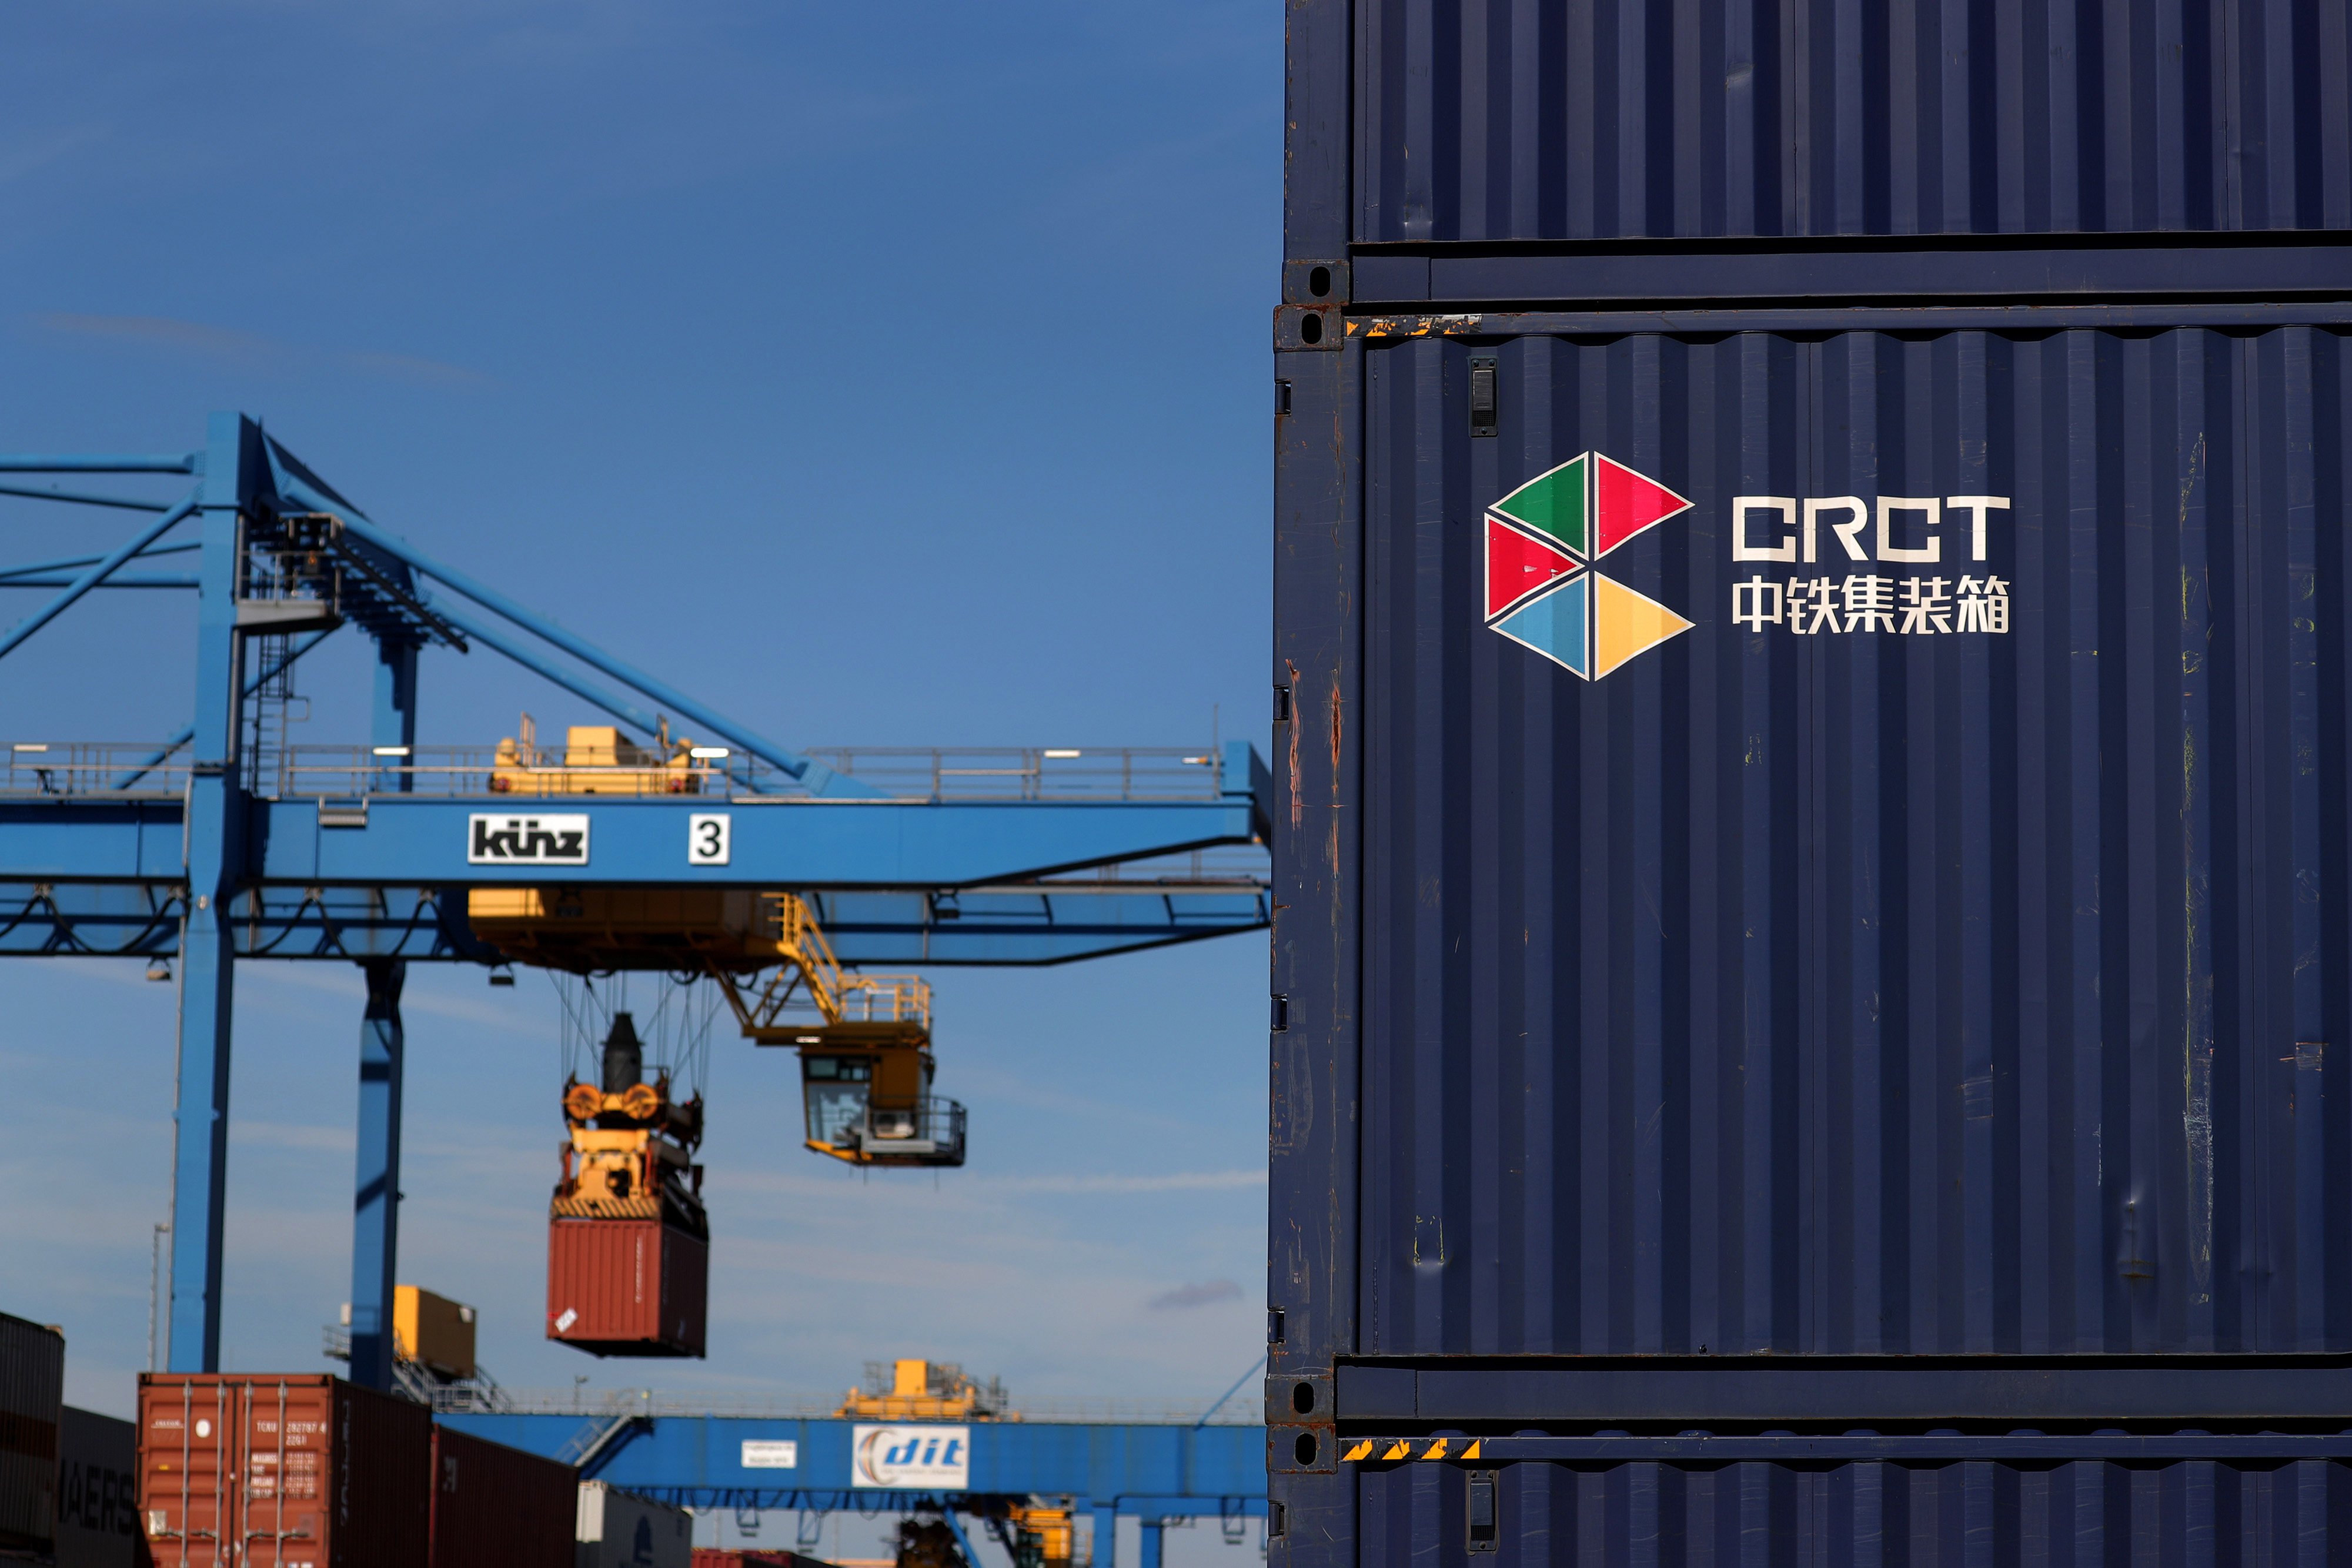 China Railway Container Transport canisters at Germany’s Duisburg port. Collaboration between Europe and China on infrastructure has become more scarce in recent years. Photo: Bloomberg